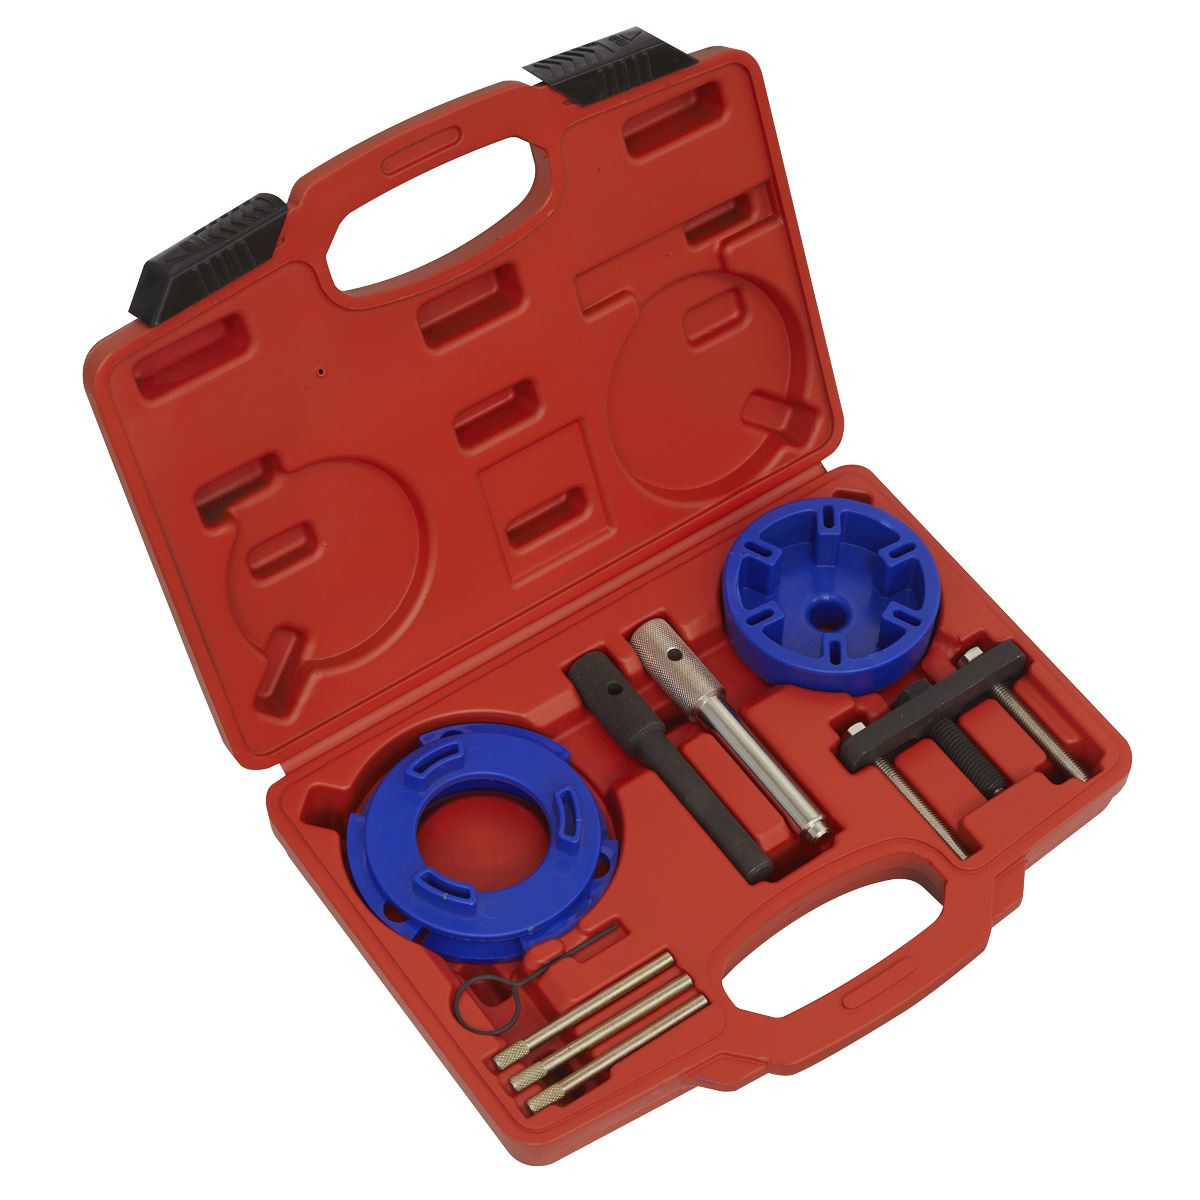 Sealey Timing Tool & Fuel Injection Pump Kit - Ford, PSA, LDV